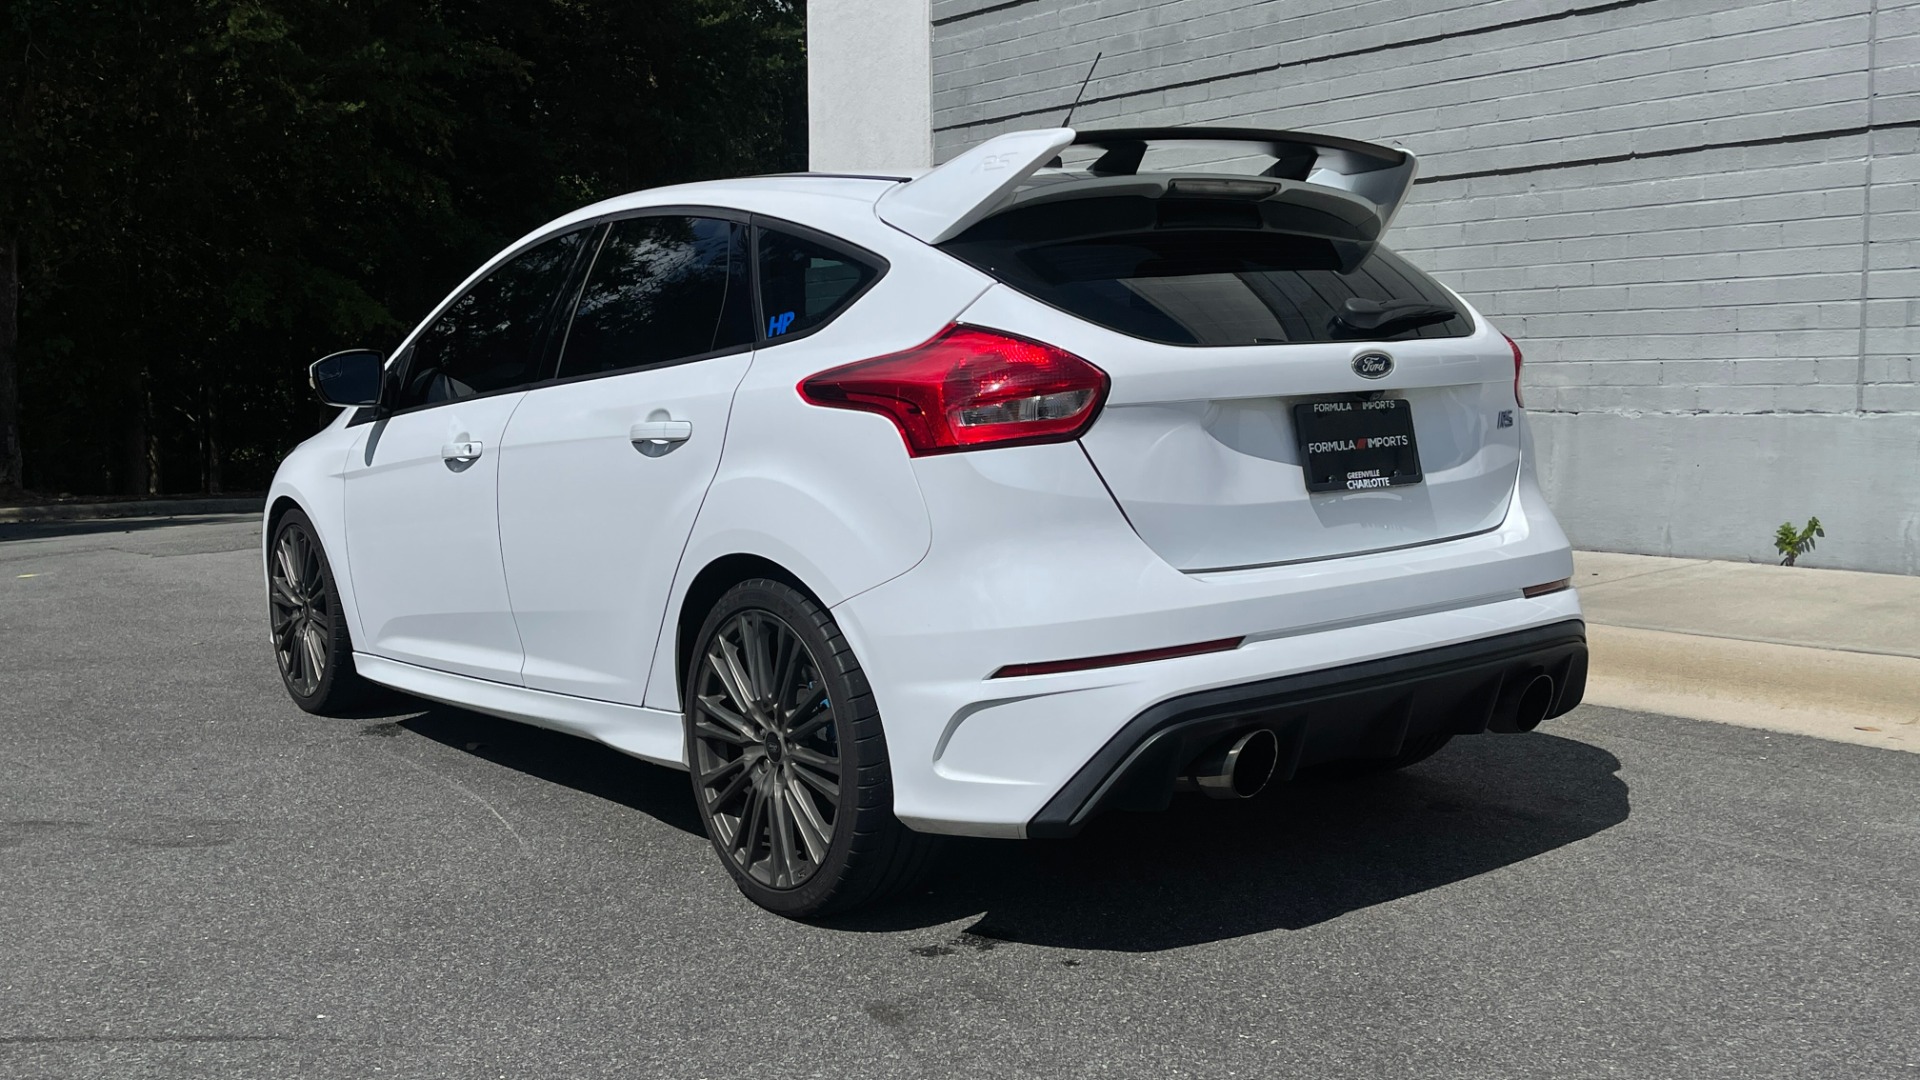 Used 2017 Ford Focus RS / SUNROOF / RS2 PACKAGE / RECAROS / MBRP EXHAUST / ALL WHEEL DRIVE for sale Sold at Formula Imports in Charlotte NC 28227 3